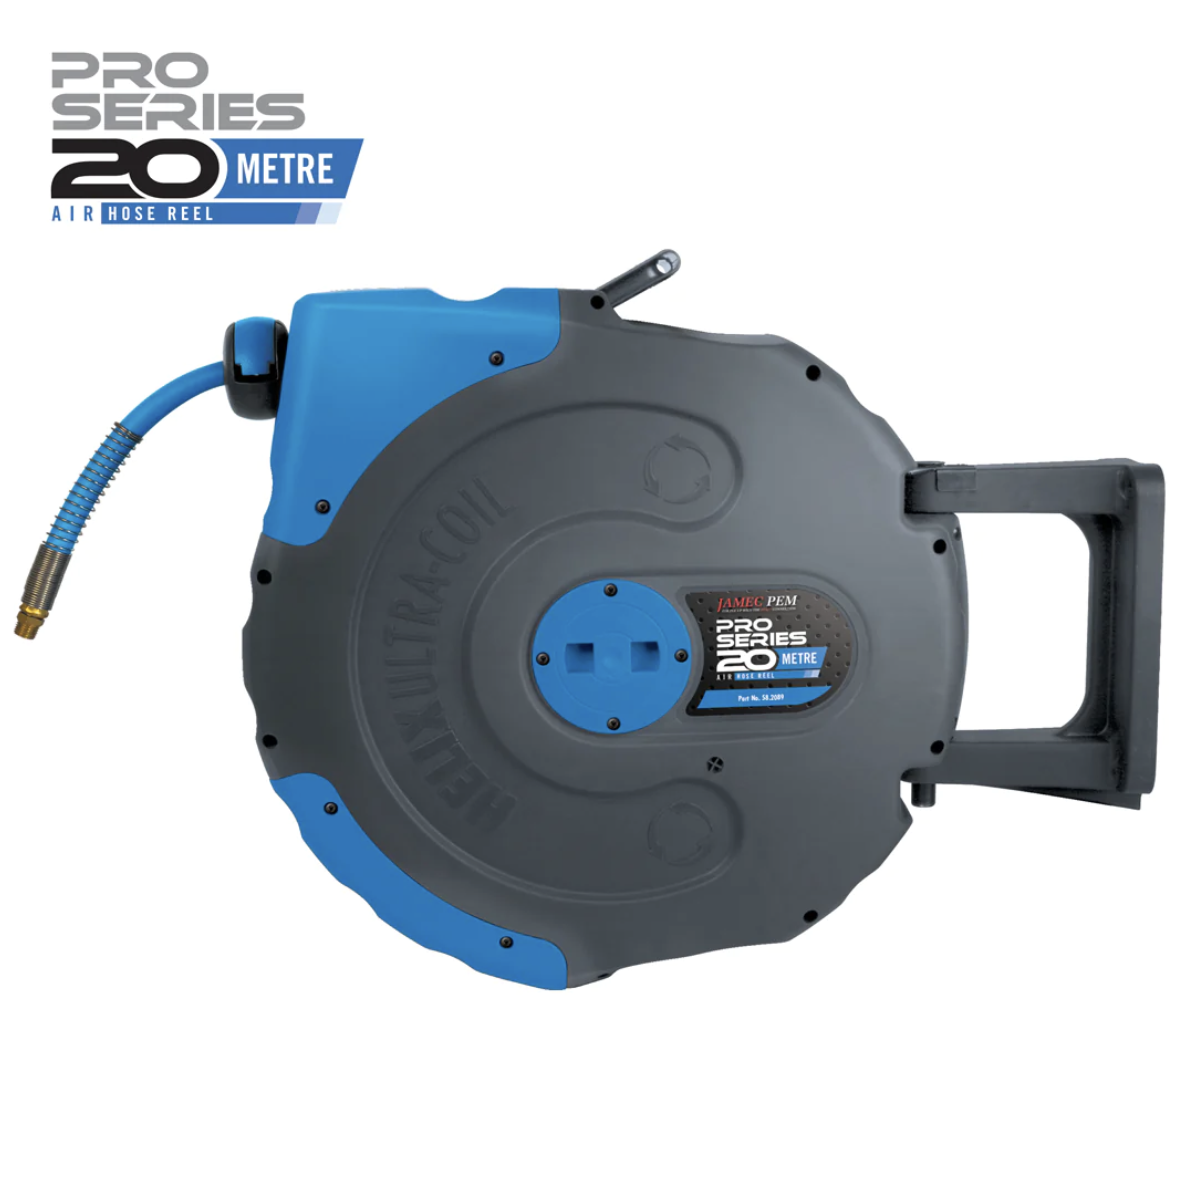 JAMEC PEM Pro Series Auto-Retracting Air Hose Reel with Wall Mount